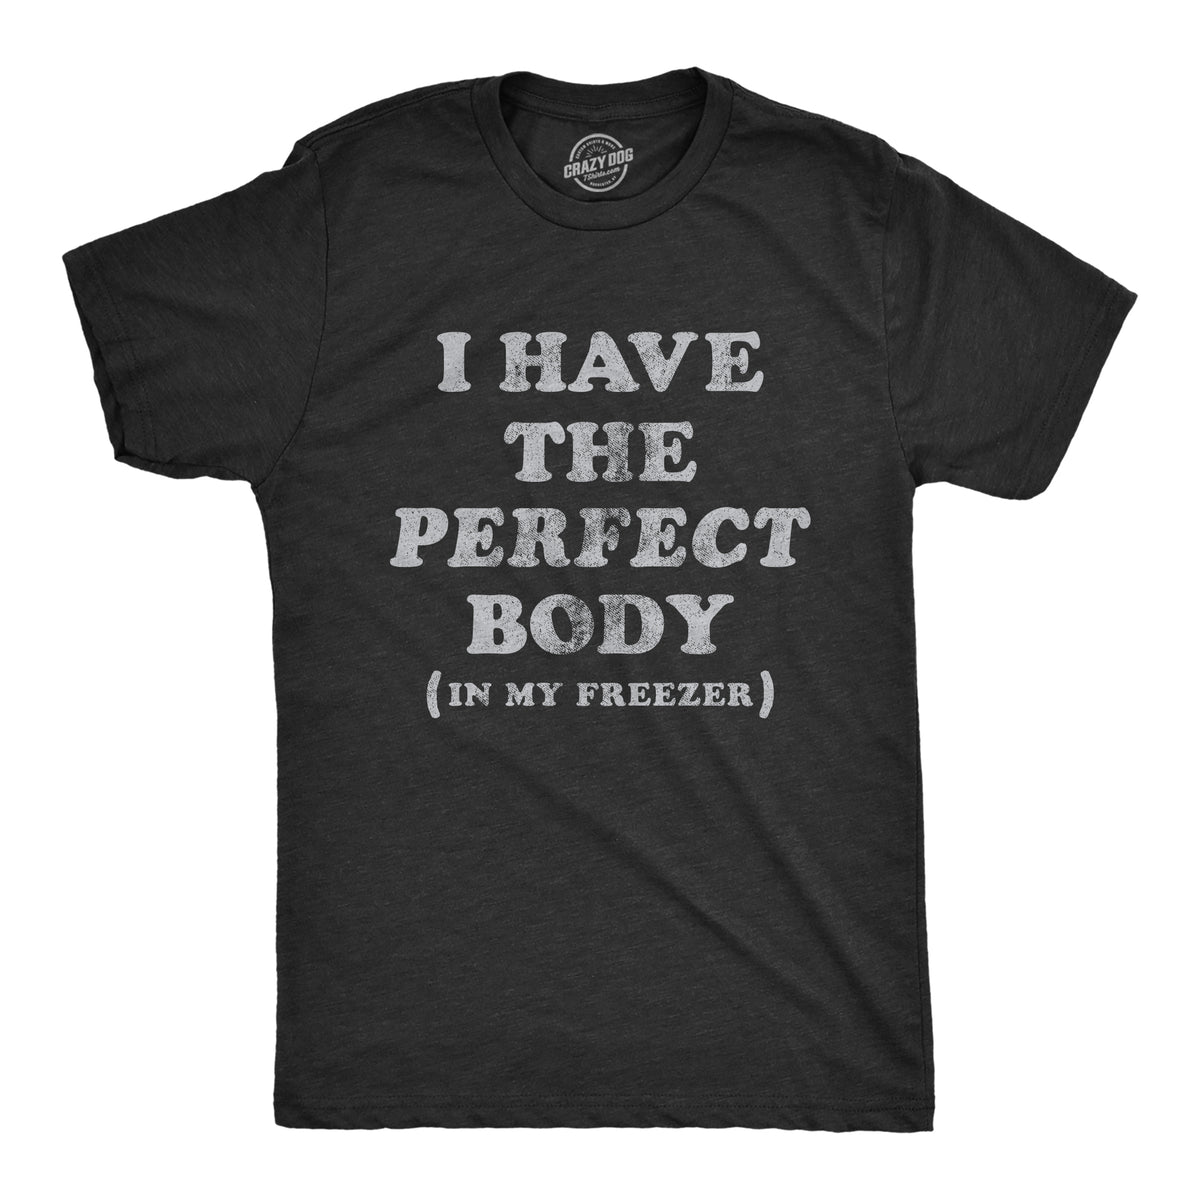 Funny Heather Black I Have The Perfect Body In My Freezer Mens T Shirt Nerdy Halloween Sarcastic Tee